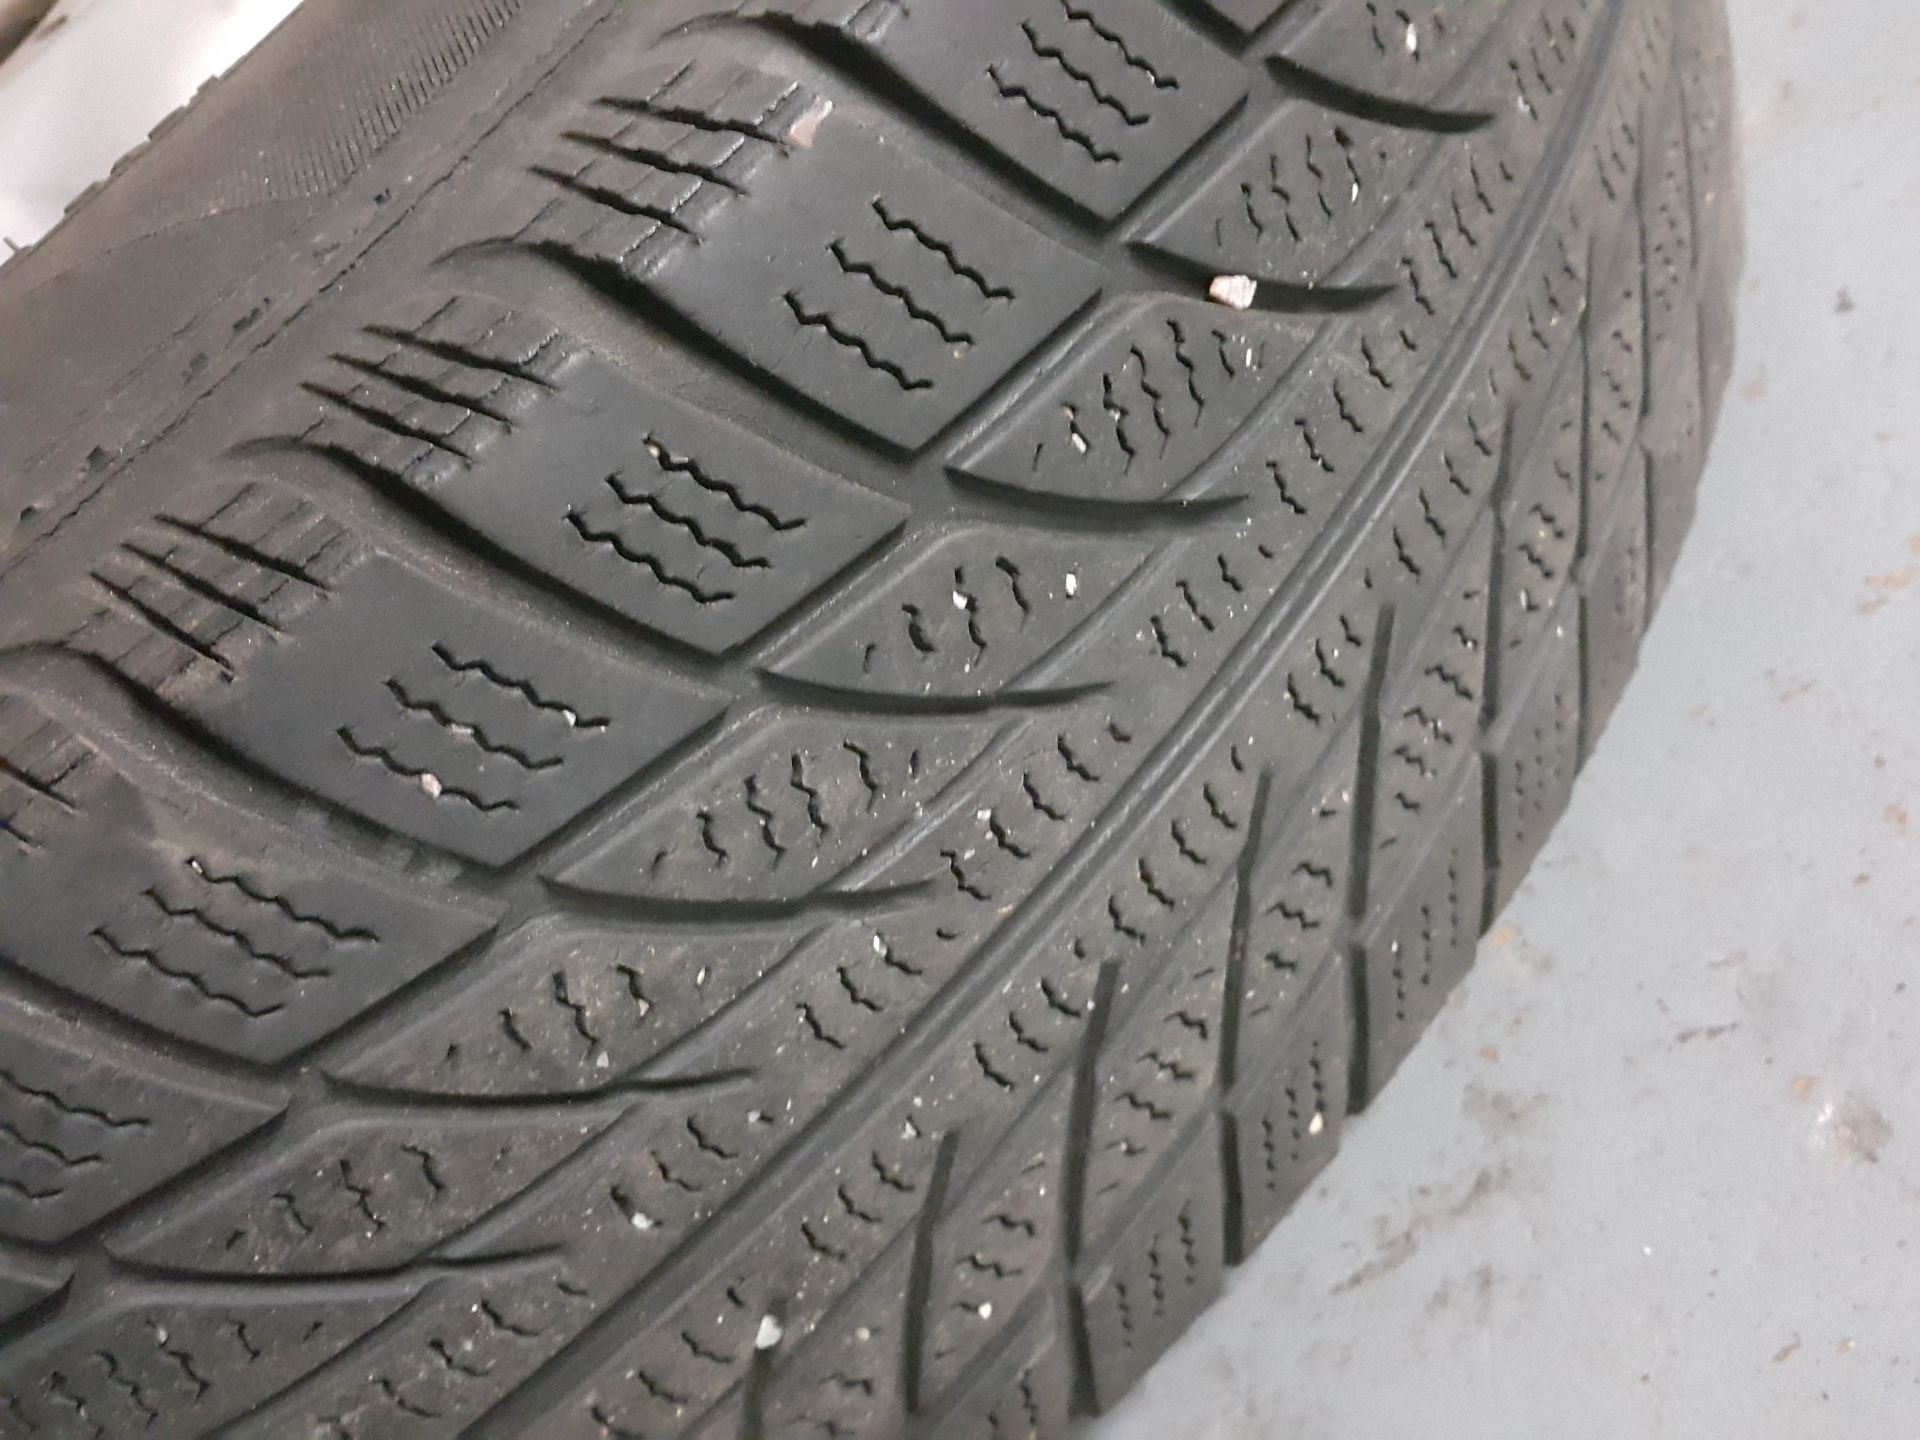 4 X FORD TRANSIT 15" STEEL RIMS WITH TYRES 195/70/R15 (2 UNIROYAL 2 OTHERS) - Image 9 of 9